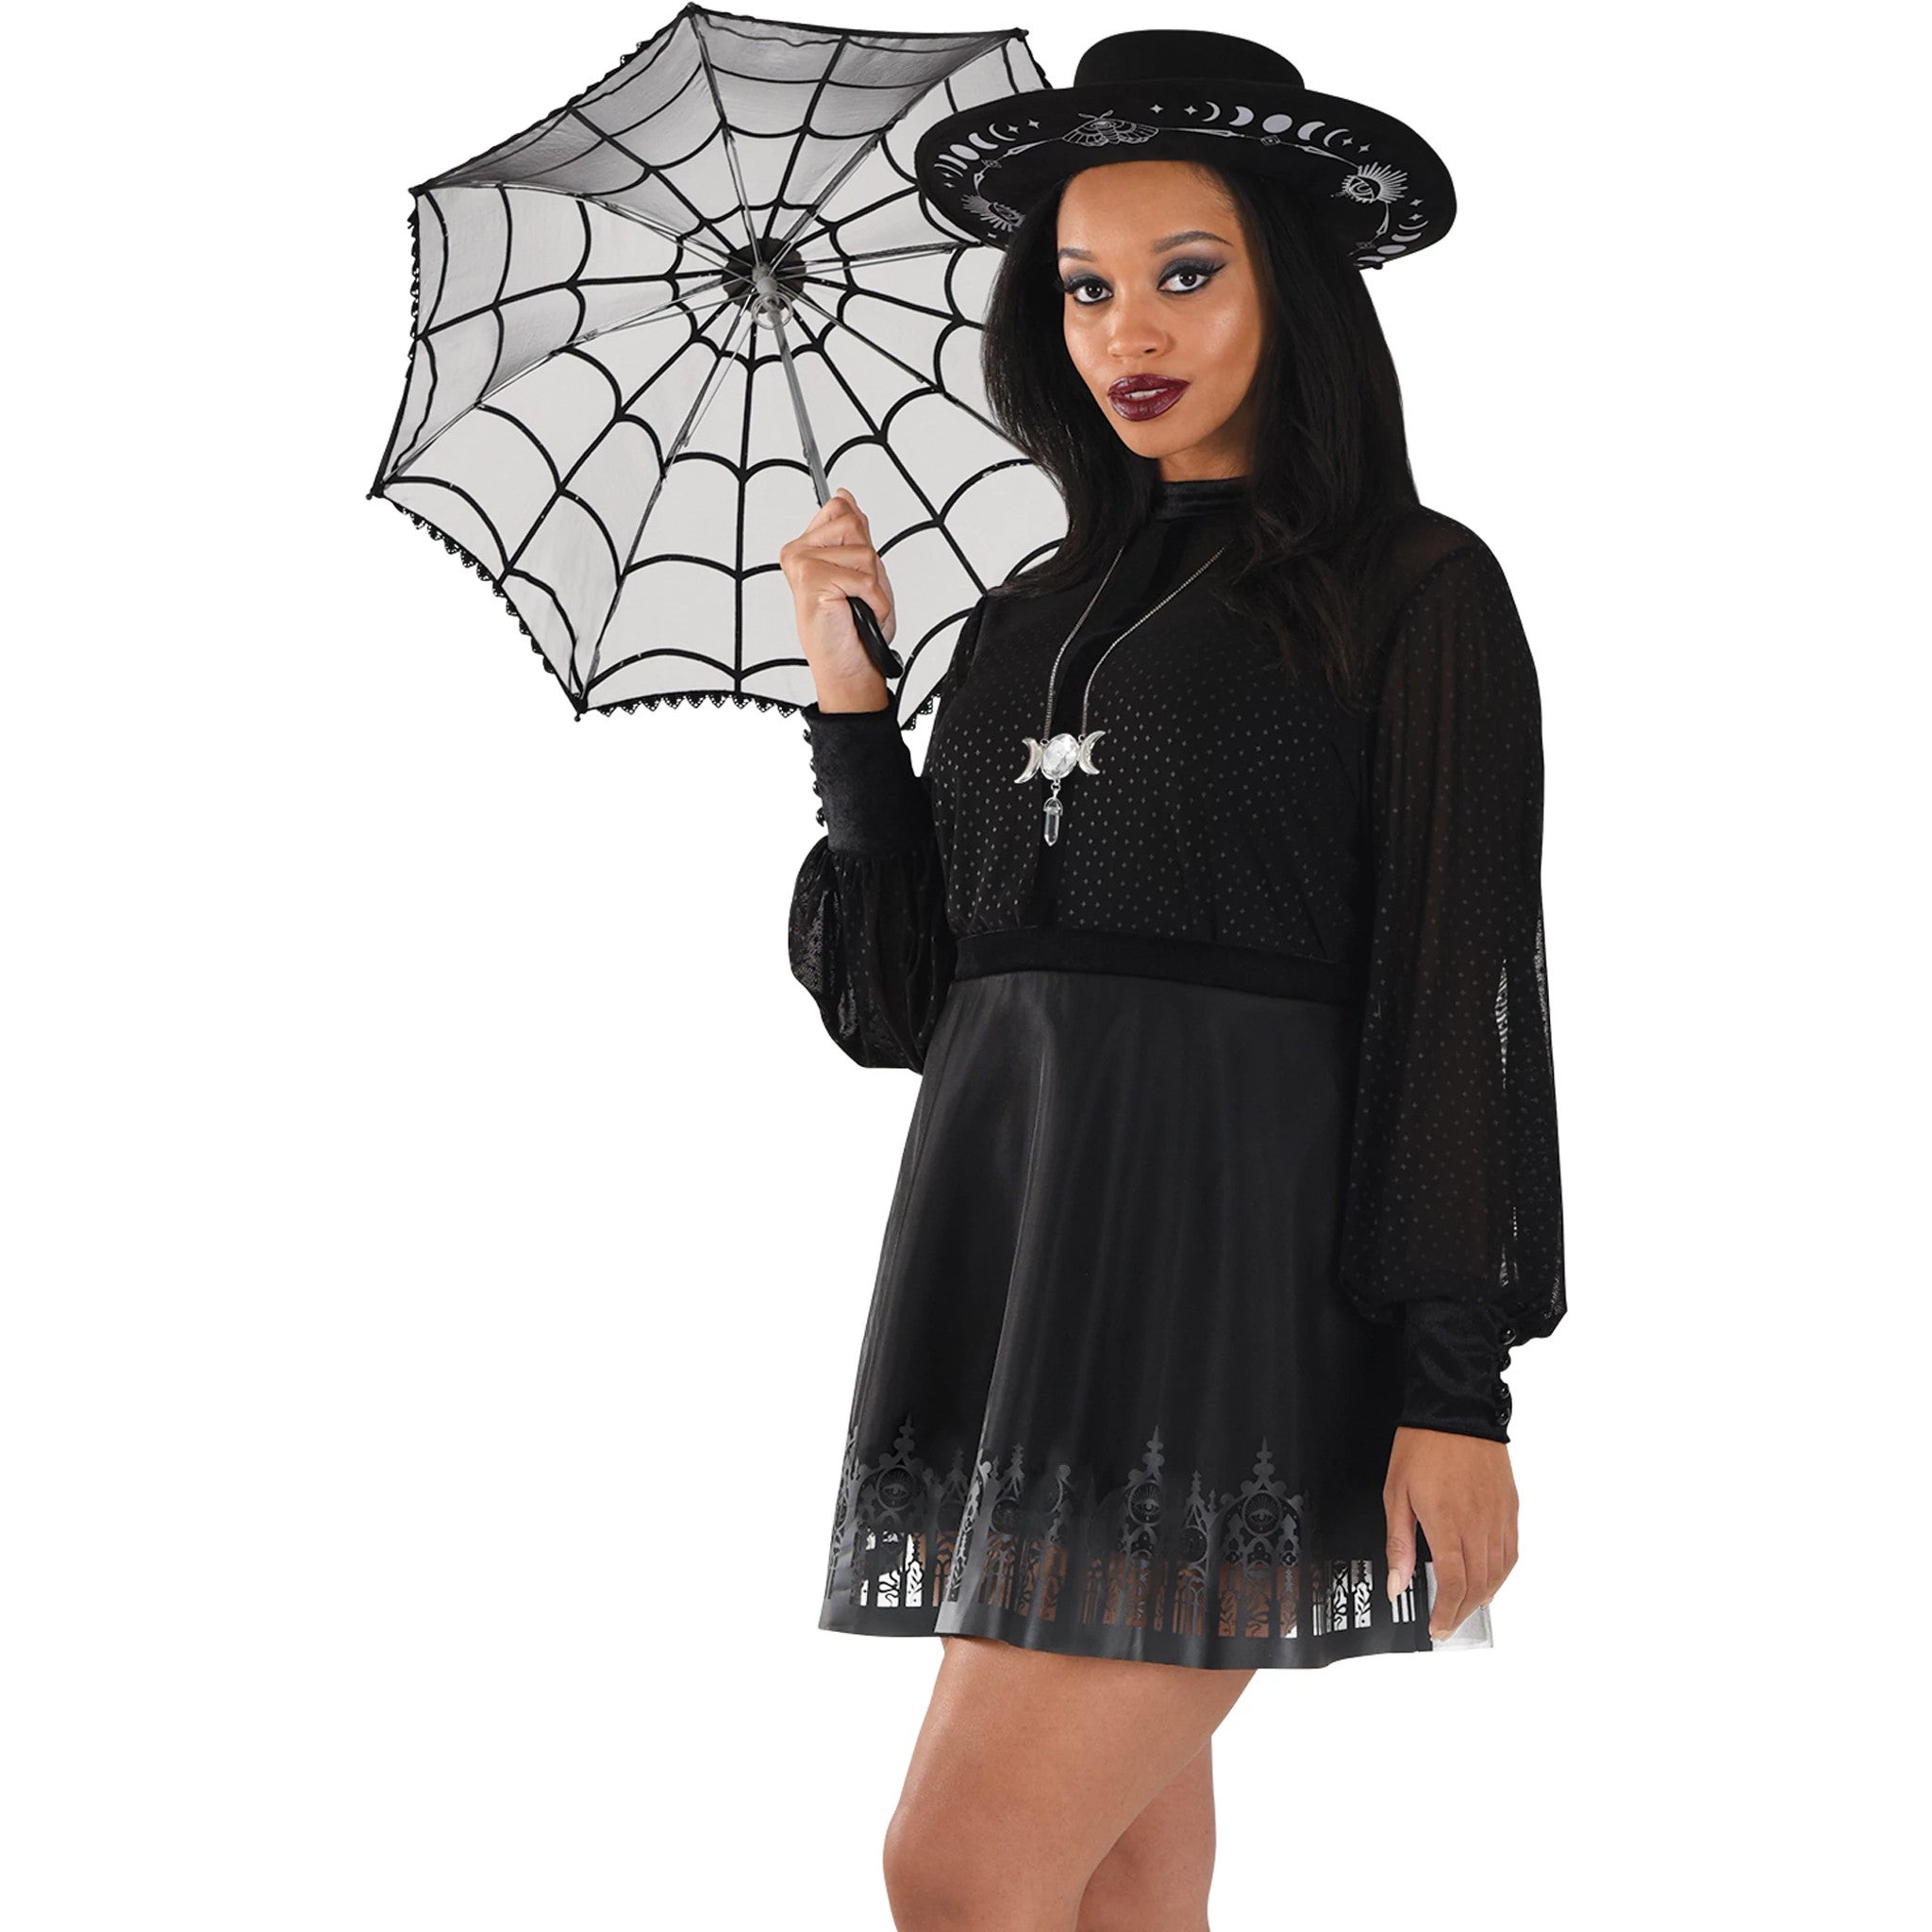 A modern-style witch costume with a black dress, hat, and parasol